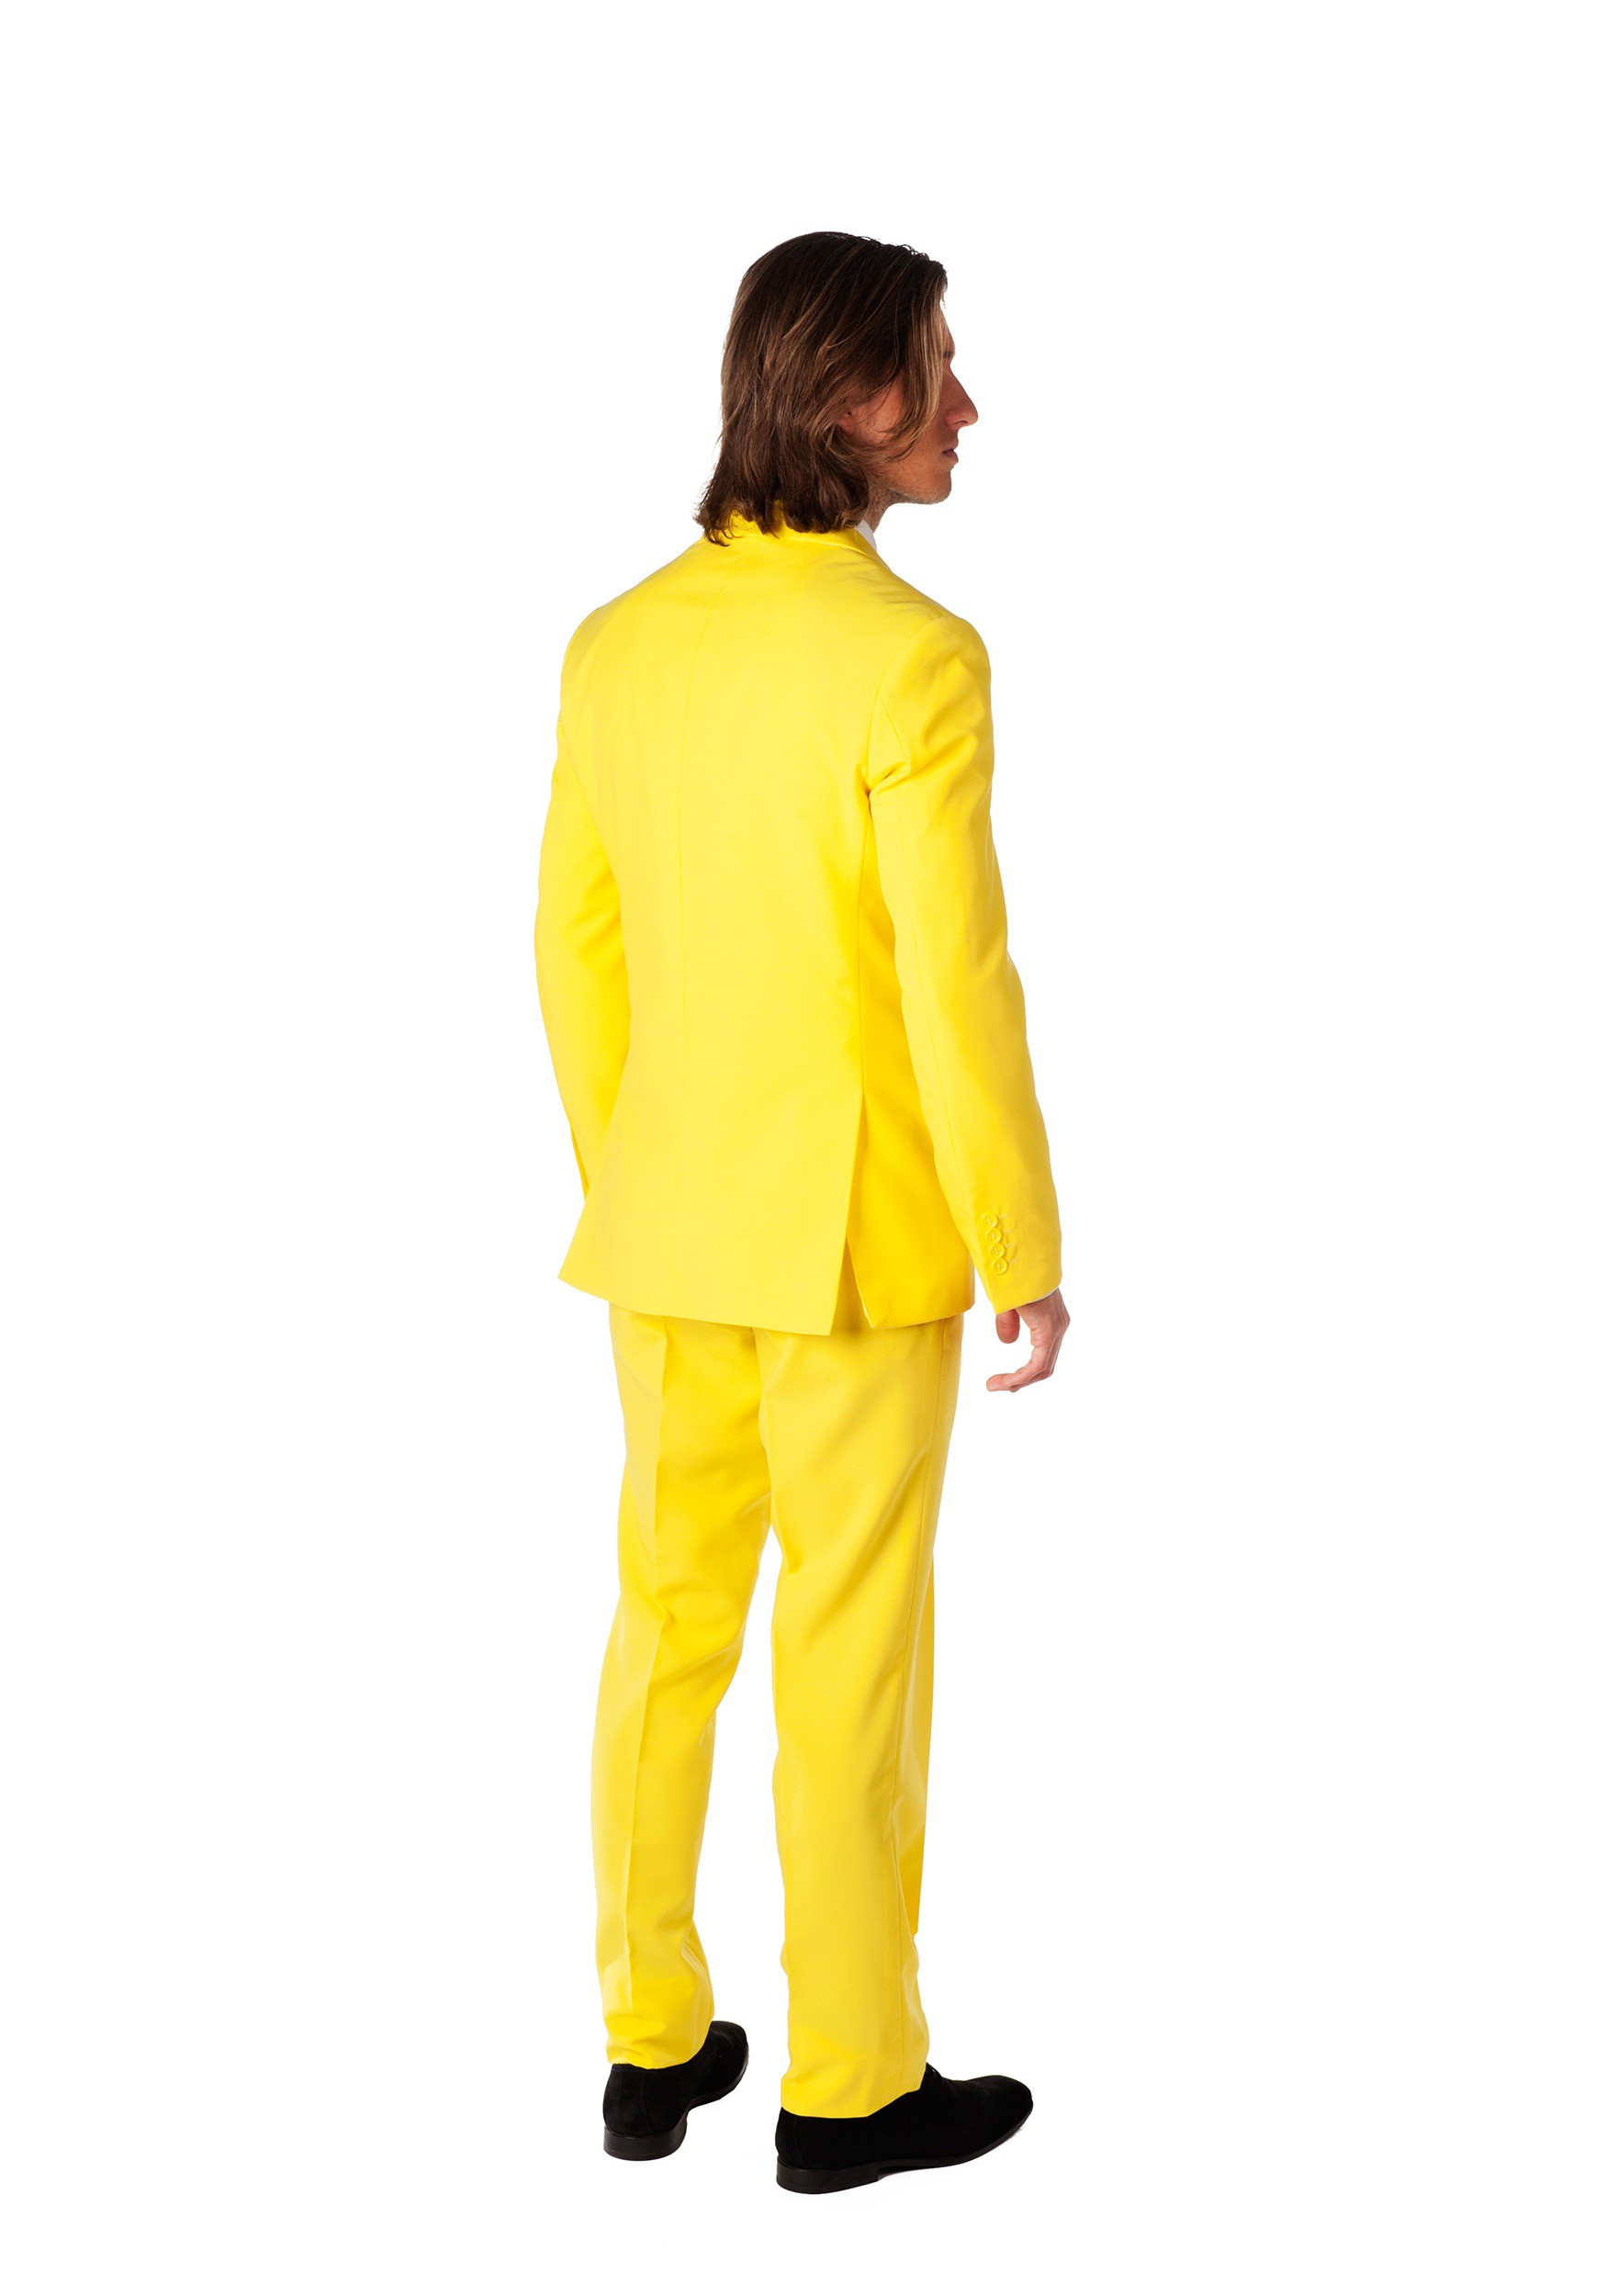 Includes Pants Full Suit OppoSuits Solid Color Party Suits for Men Yellow Fellow Jacket And Tie Abito da Uomo 